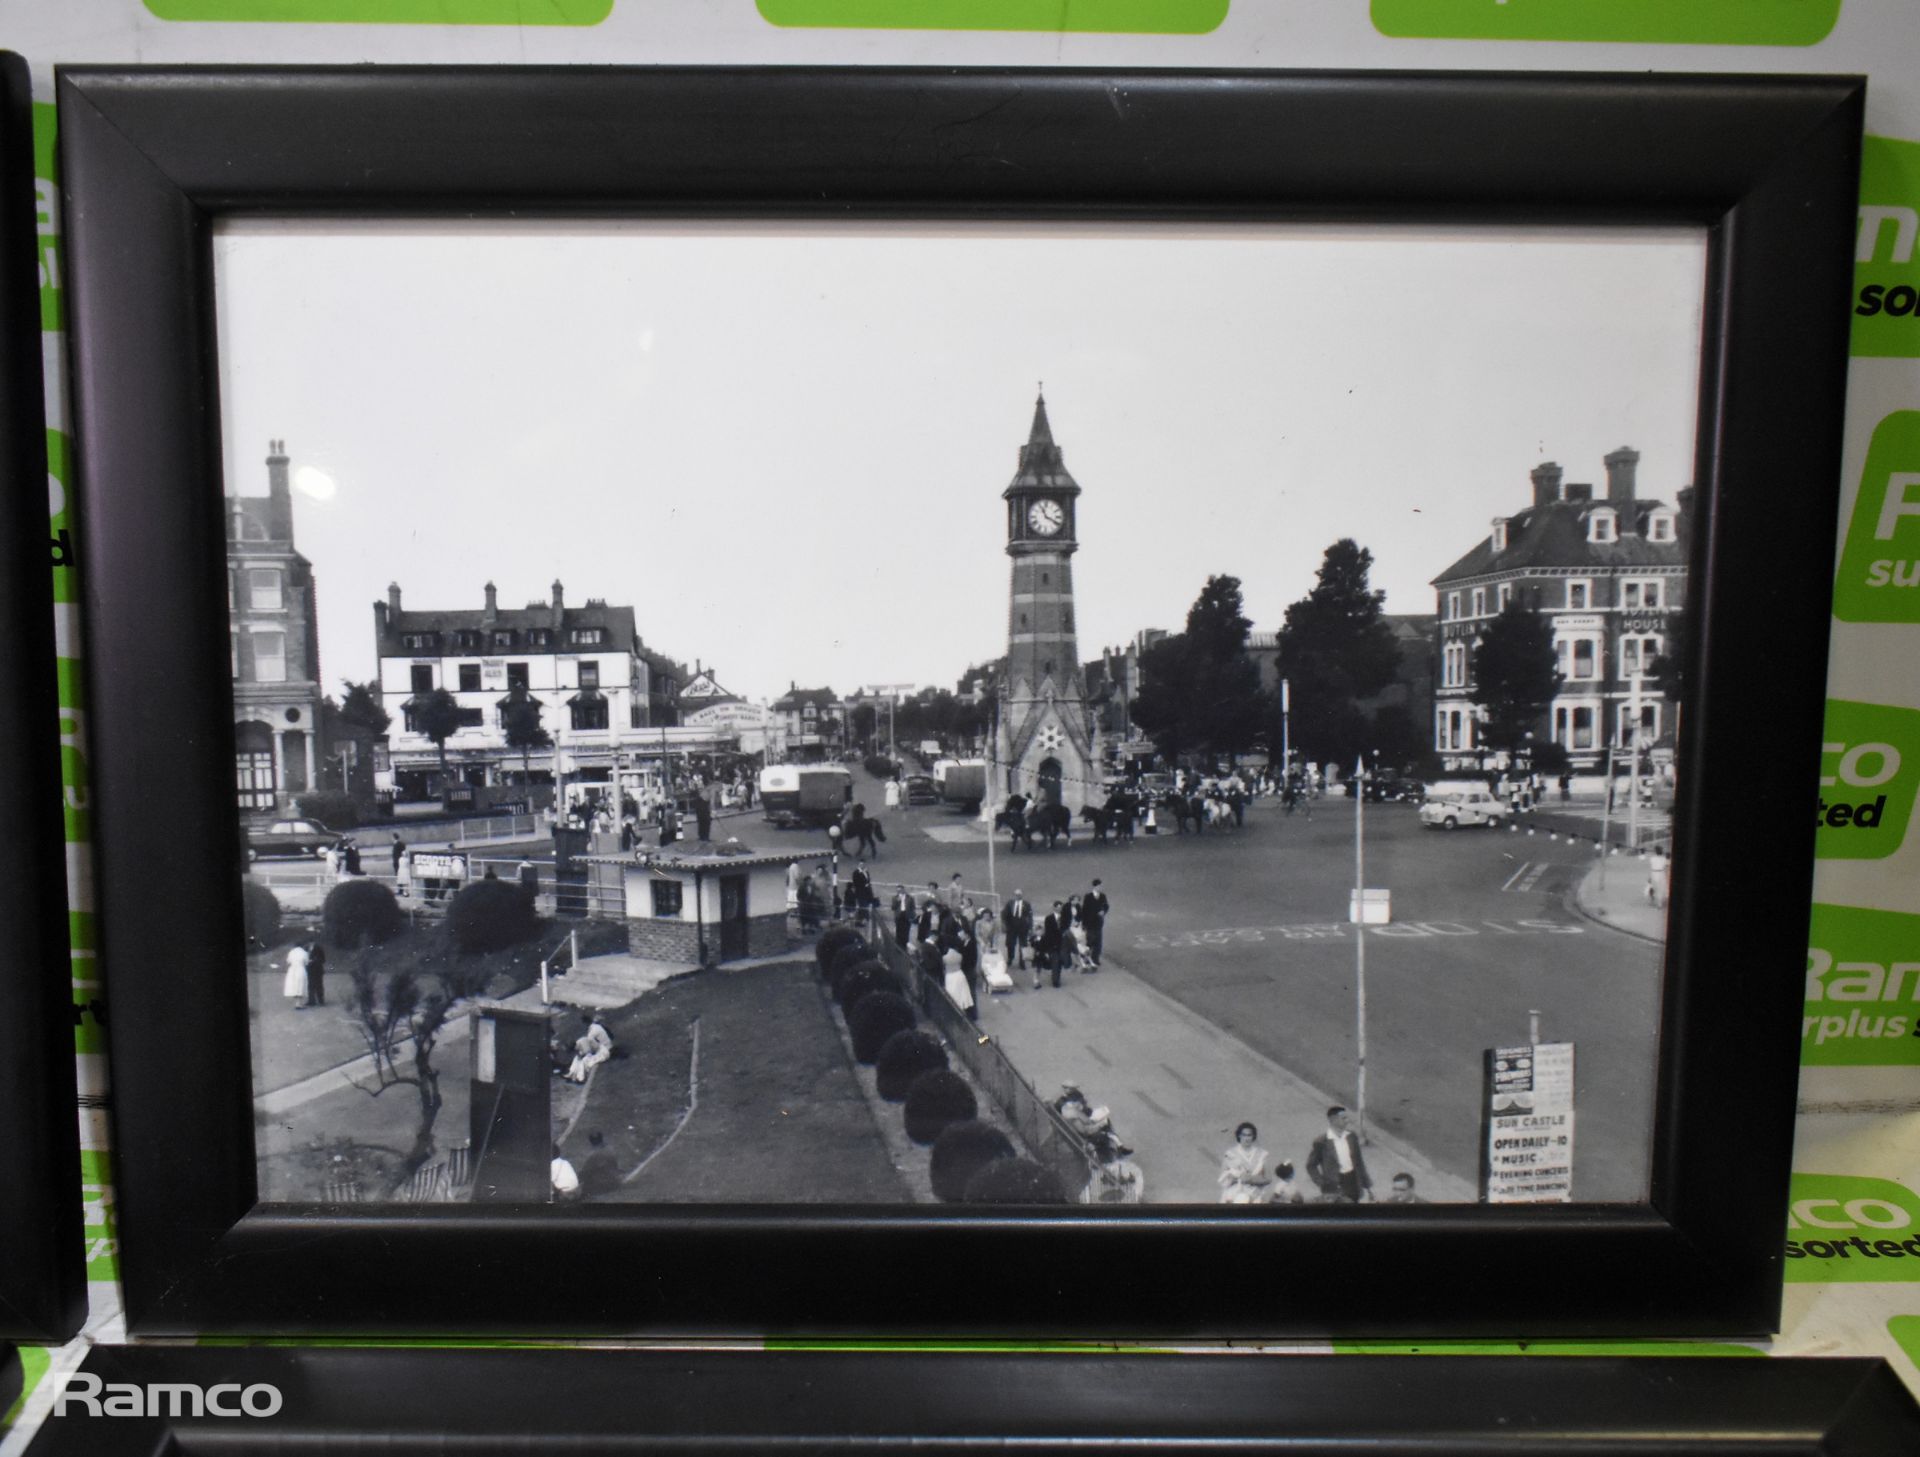 4x Skegness memorabilia photos - Clock Tower and Grande Parade - frame size: 13.5 x 10 inches - Image 3 of 5